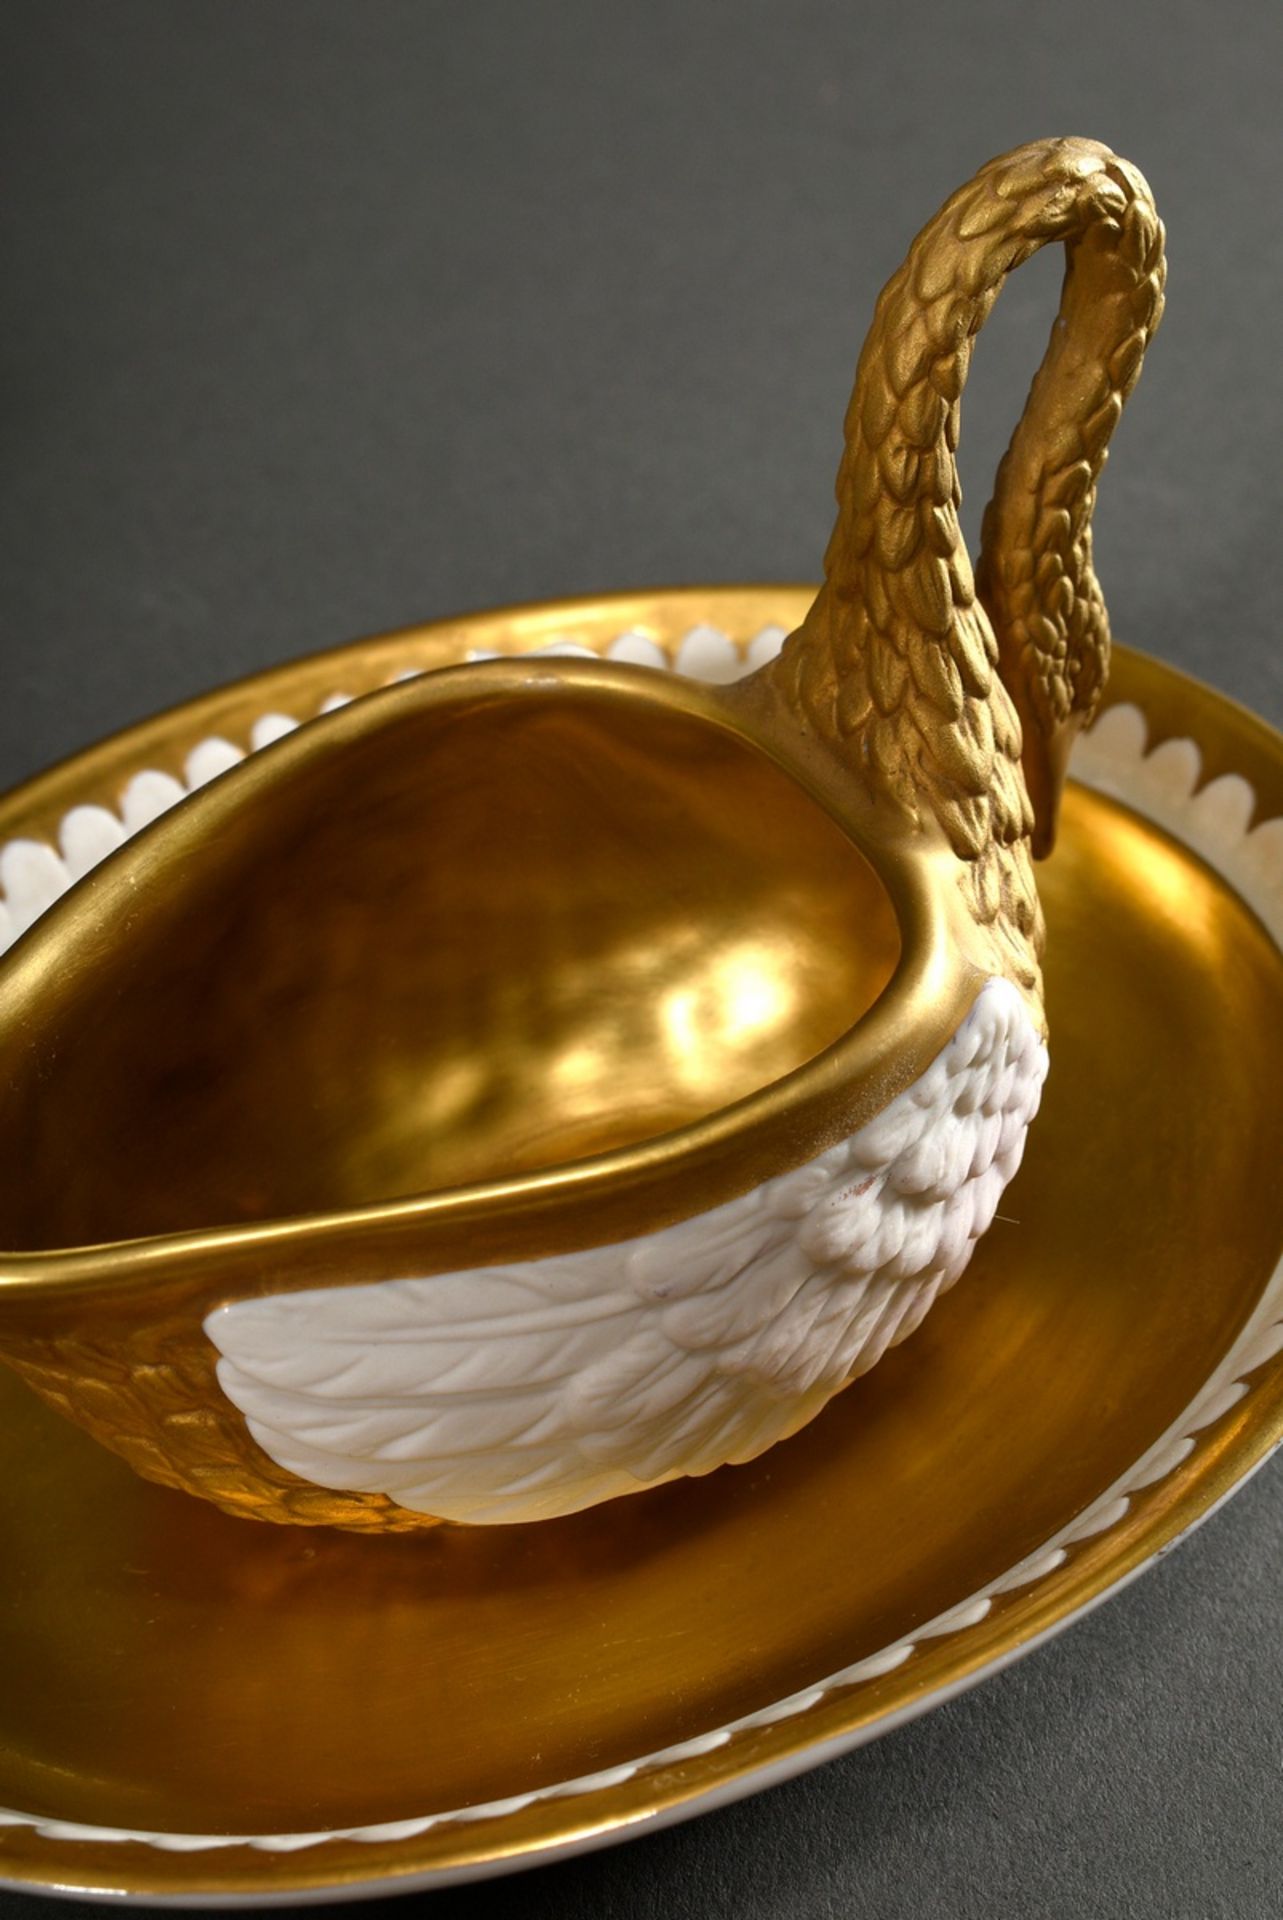 Pair of Dresden porcelain cups/UT "Swan" with rich gilding, molding no.: 6709, year: 1987/1988, bos - Image 3 of 7